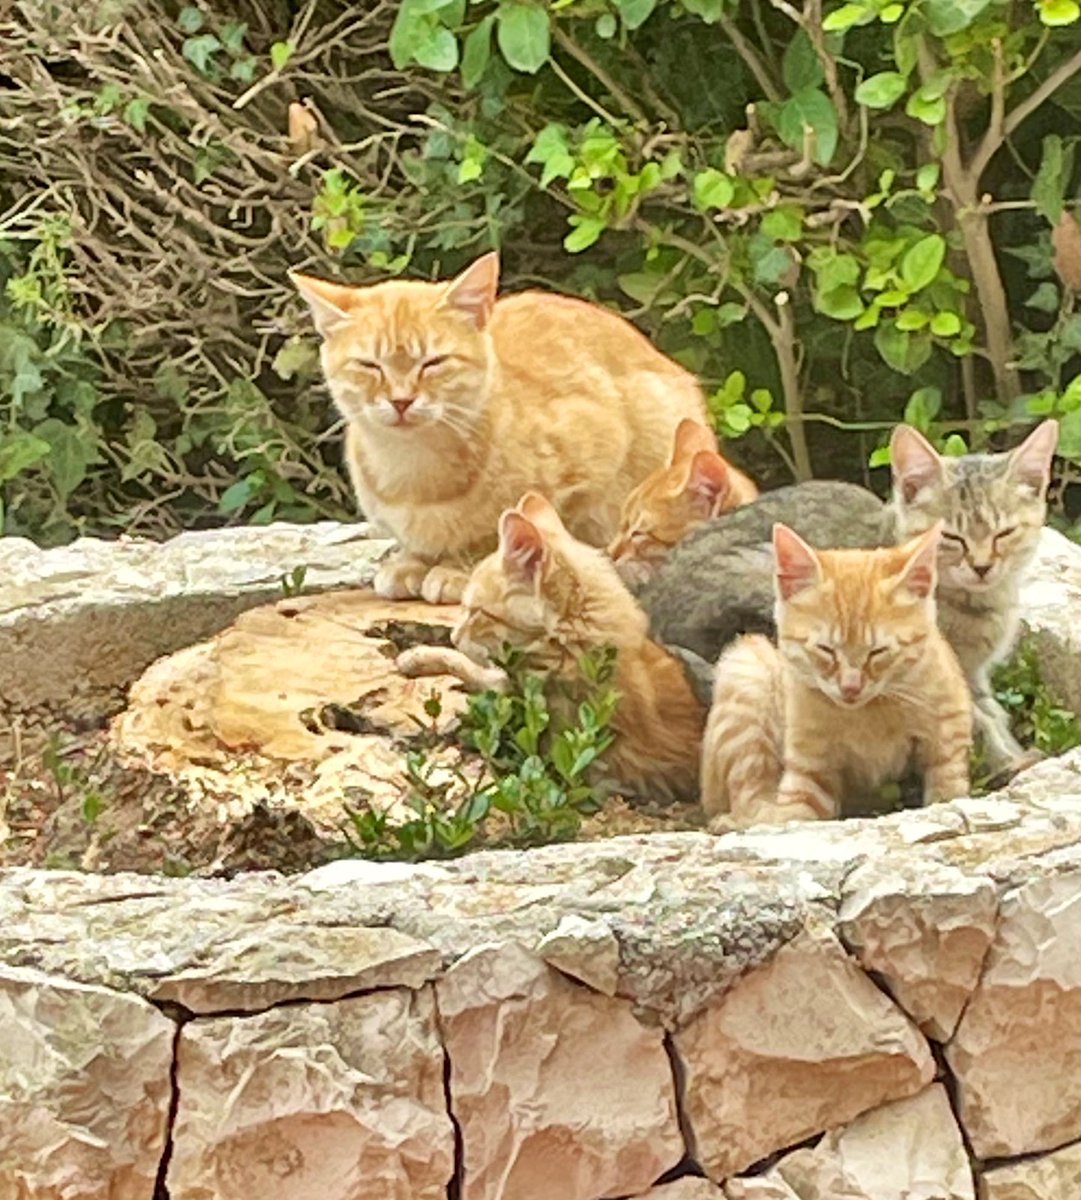 Four of my kittens and their Mama. There are loads of fellow gingers like me, girls and boys. I’ve heard that ginger girls are not common but we have a few on the island 🐈 I think gingers rule 😸 #CatsAreFamily #catsontwittter #GingersRule